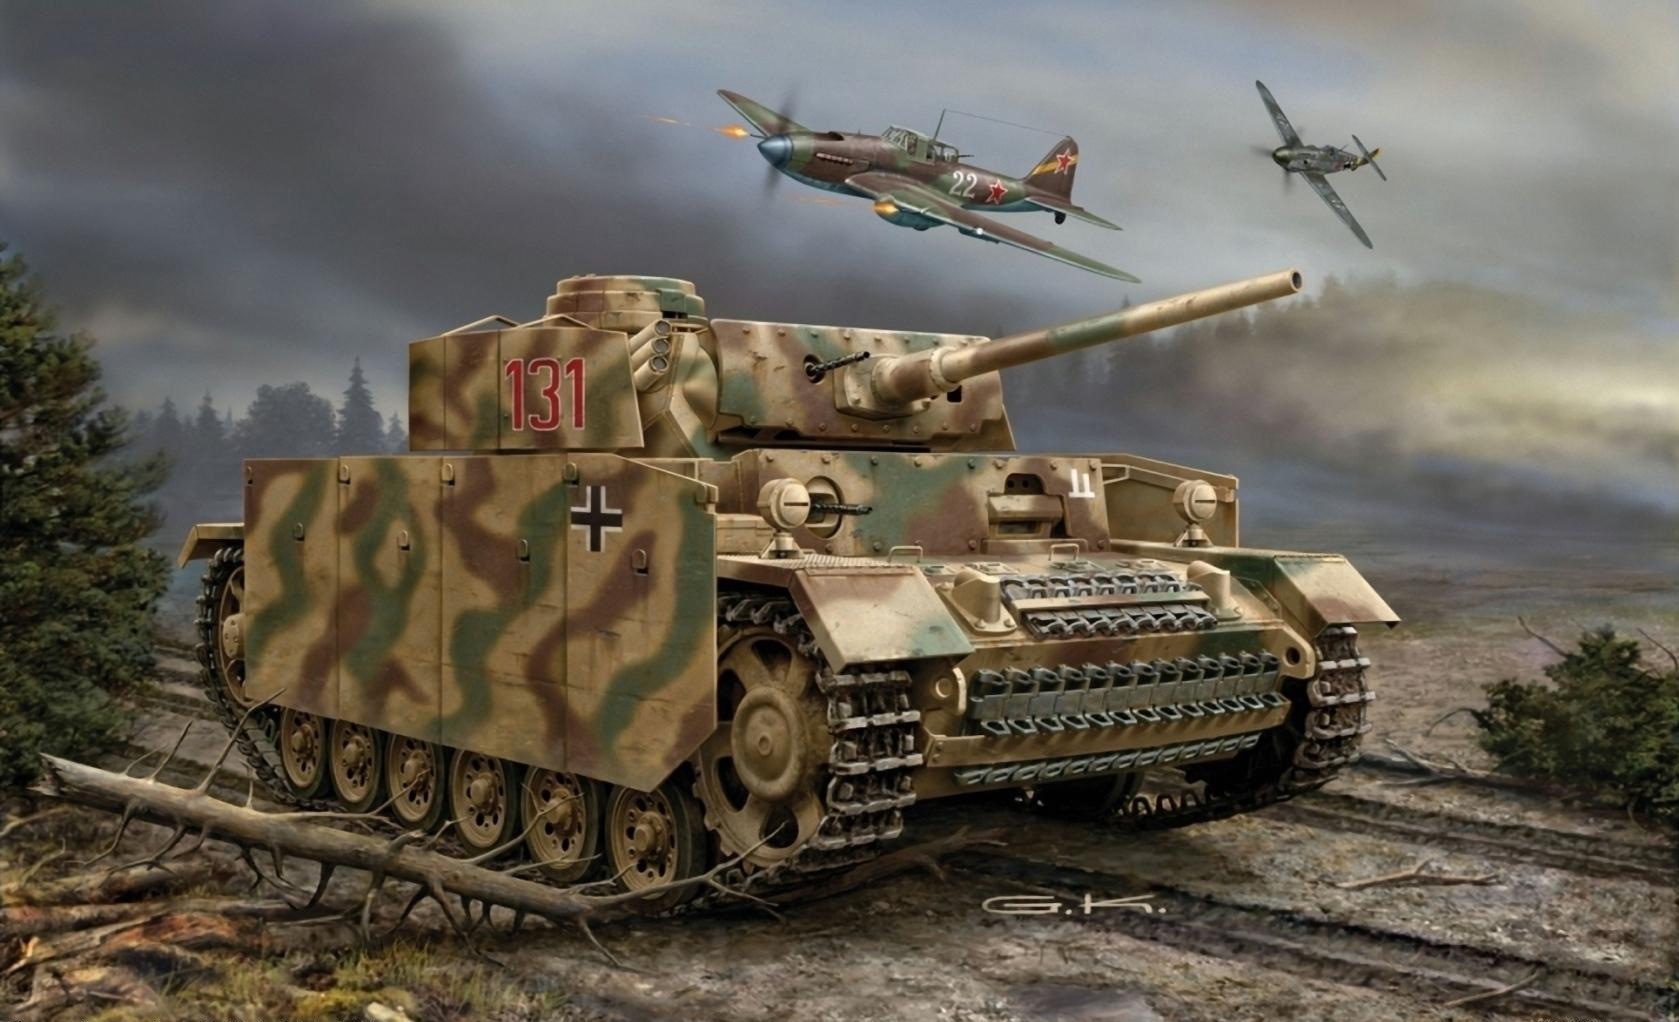 15588 download wallpaper transport, airplanes, tanks, war screensavers and pictures for free